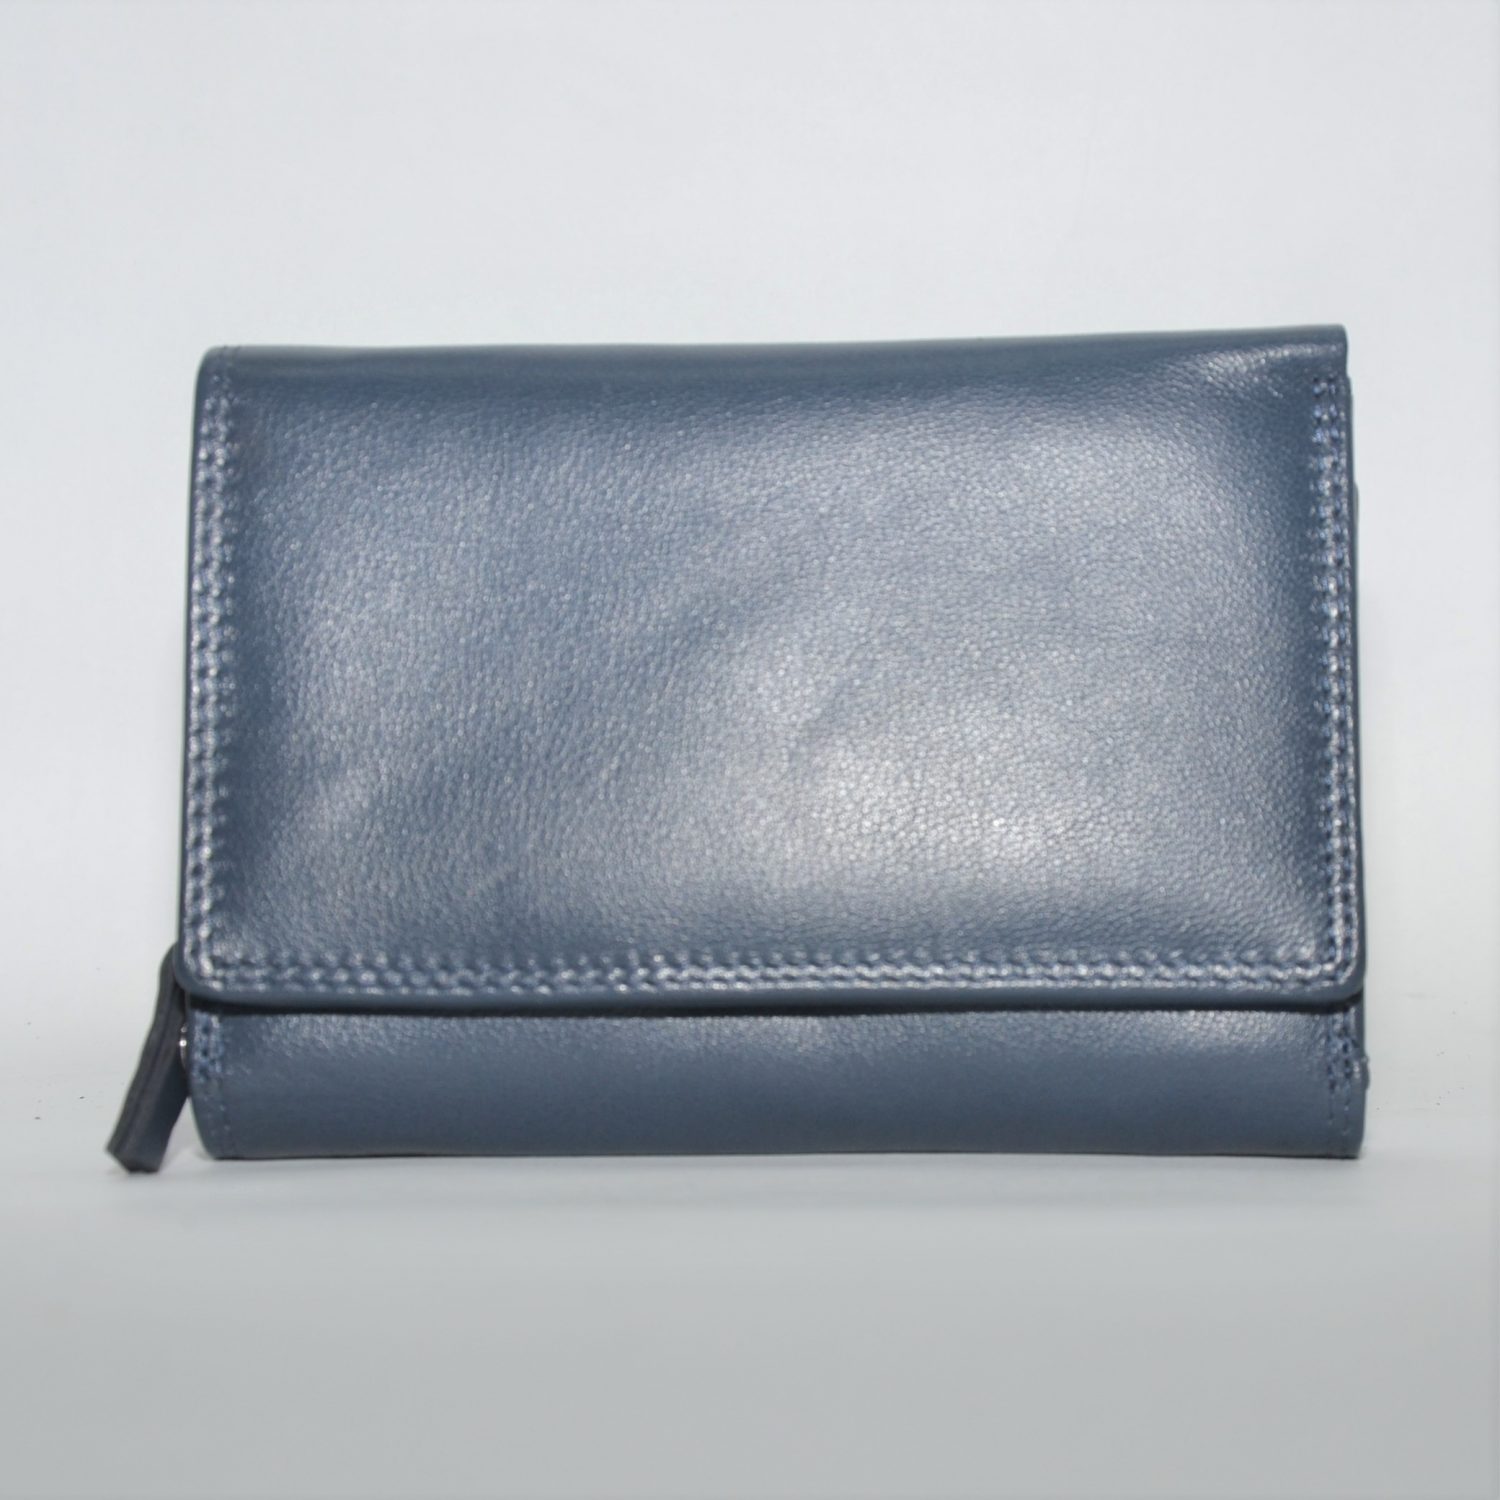 Primehide Leather RFID Purse - Style No. 2804 - OJP Products